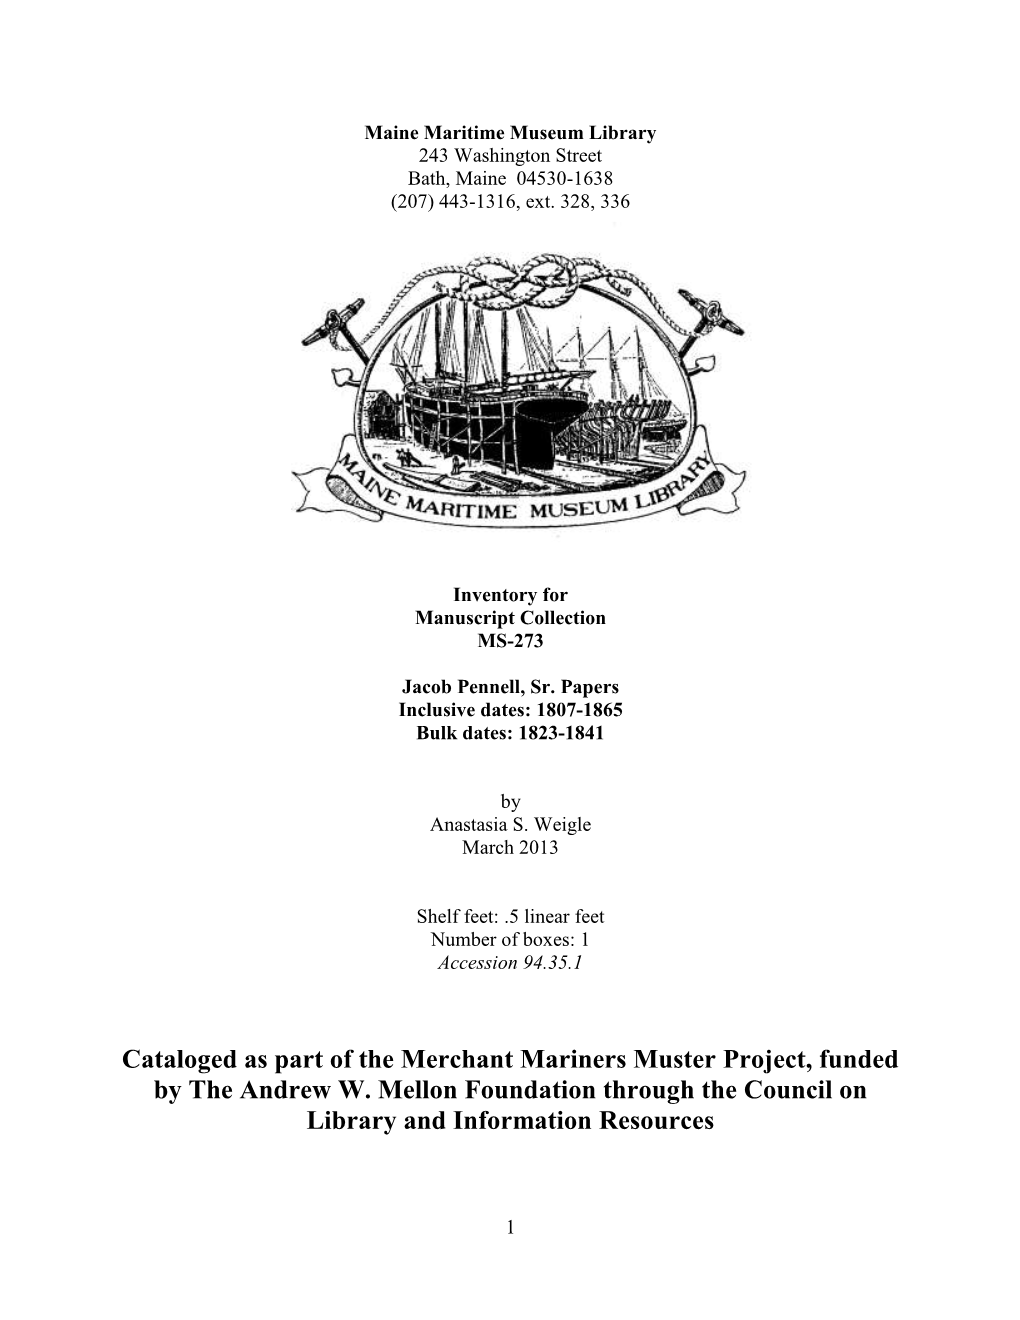 Cataloged As Part of the Merchant Mariners Muster Project, Funded by the Andrew W. Mellon Foundation Through the Council on Library and Information Resources